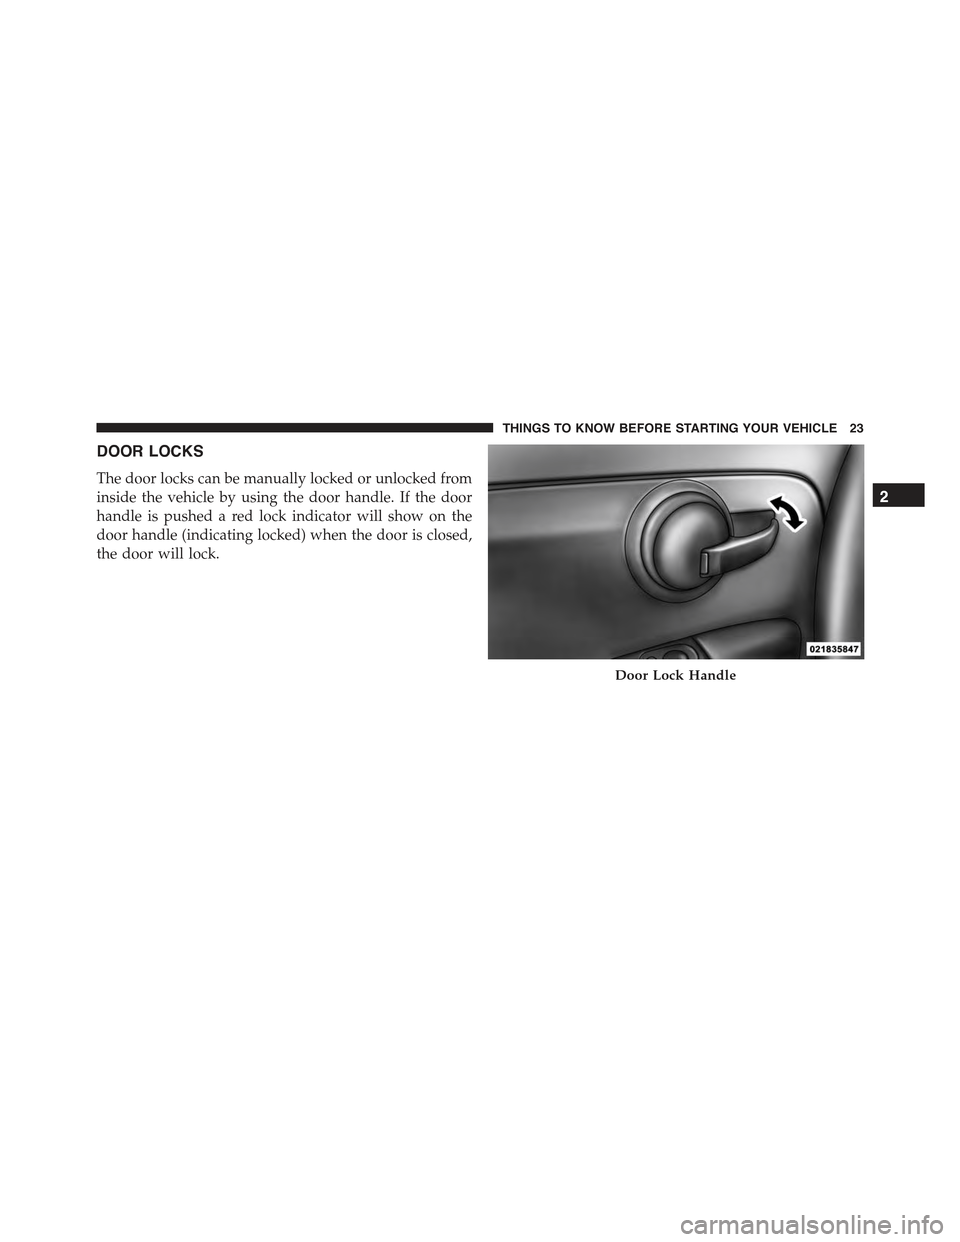 FIAT 500C 2013 2.G Owners Manual DOOR LOCKS
The door locks can be manually locked or unlocked from
inside the vehicle by using the door handle. If the door
handle is pushed a red lock indicator will show on the
door handle (indicatin